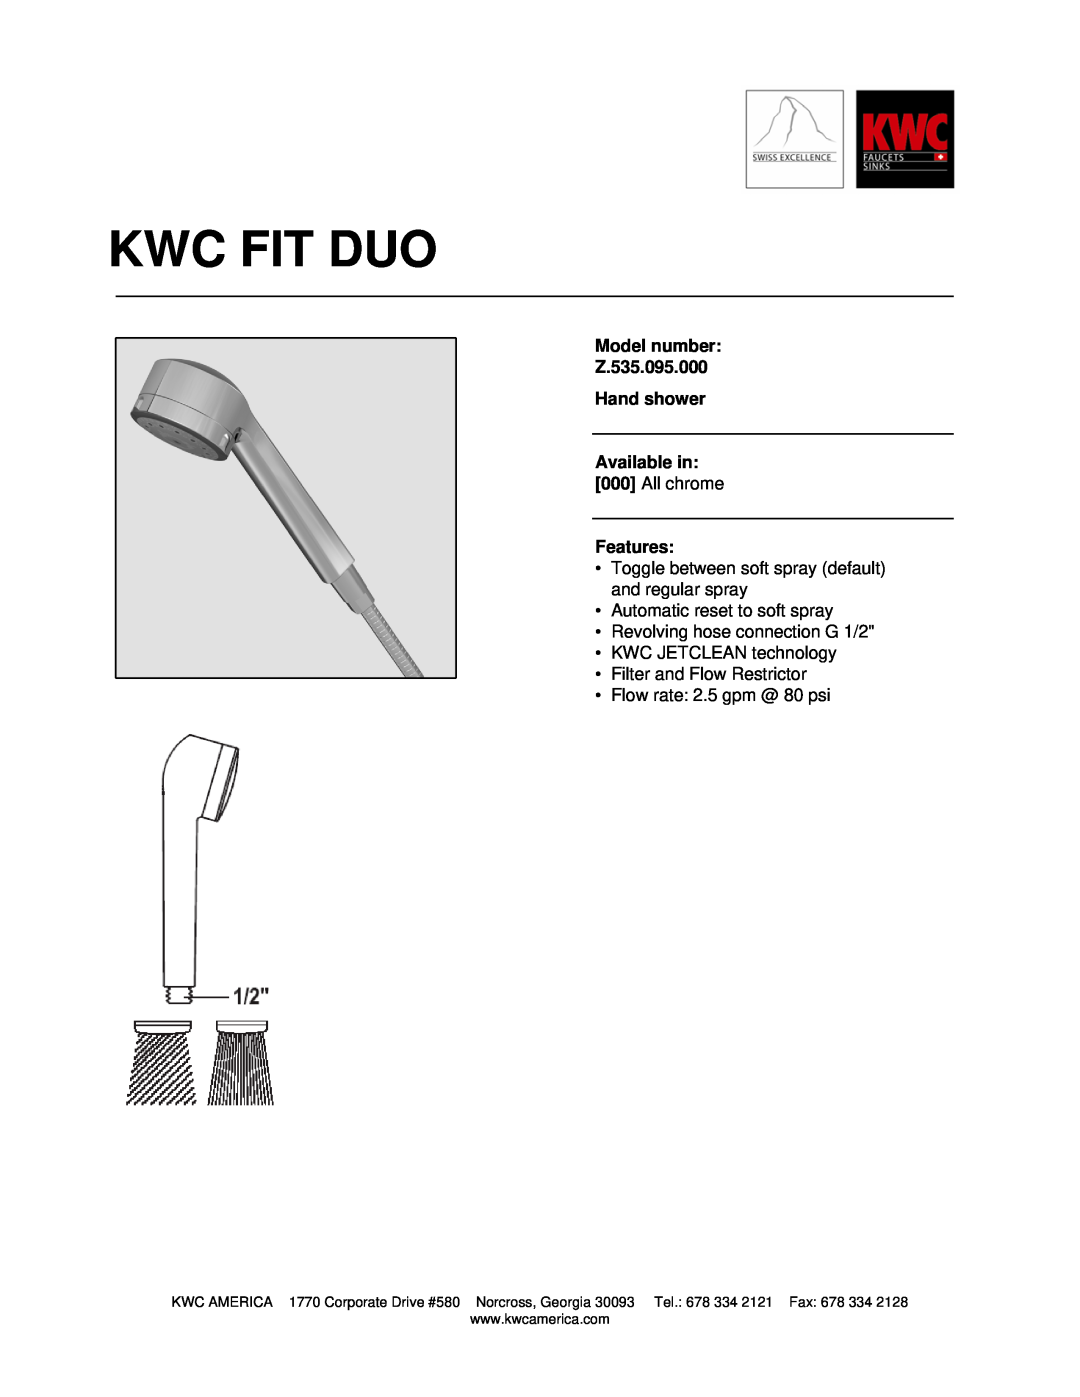 KWC manual Kwc Fit Duo, Model number Z.535.095.000 Hand shower, Available in, All chrome, Features 